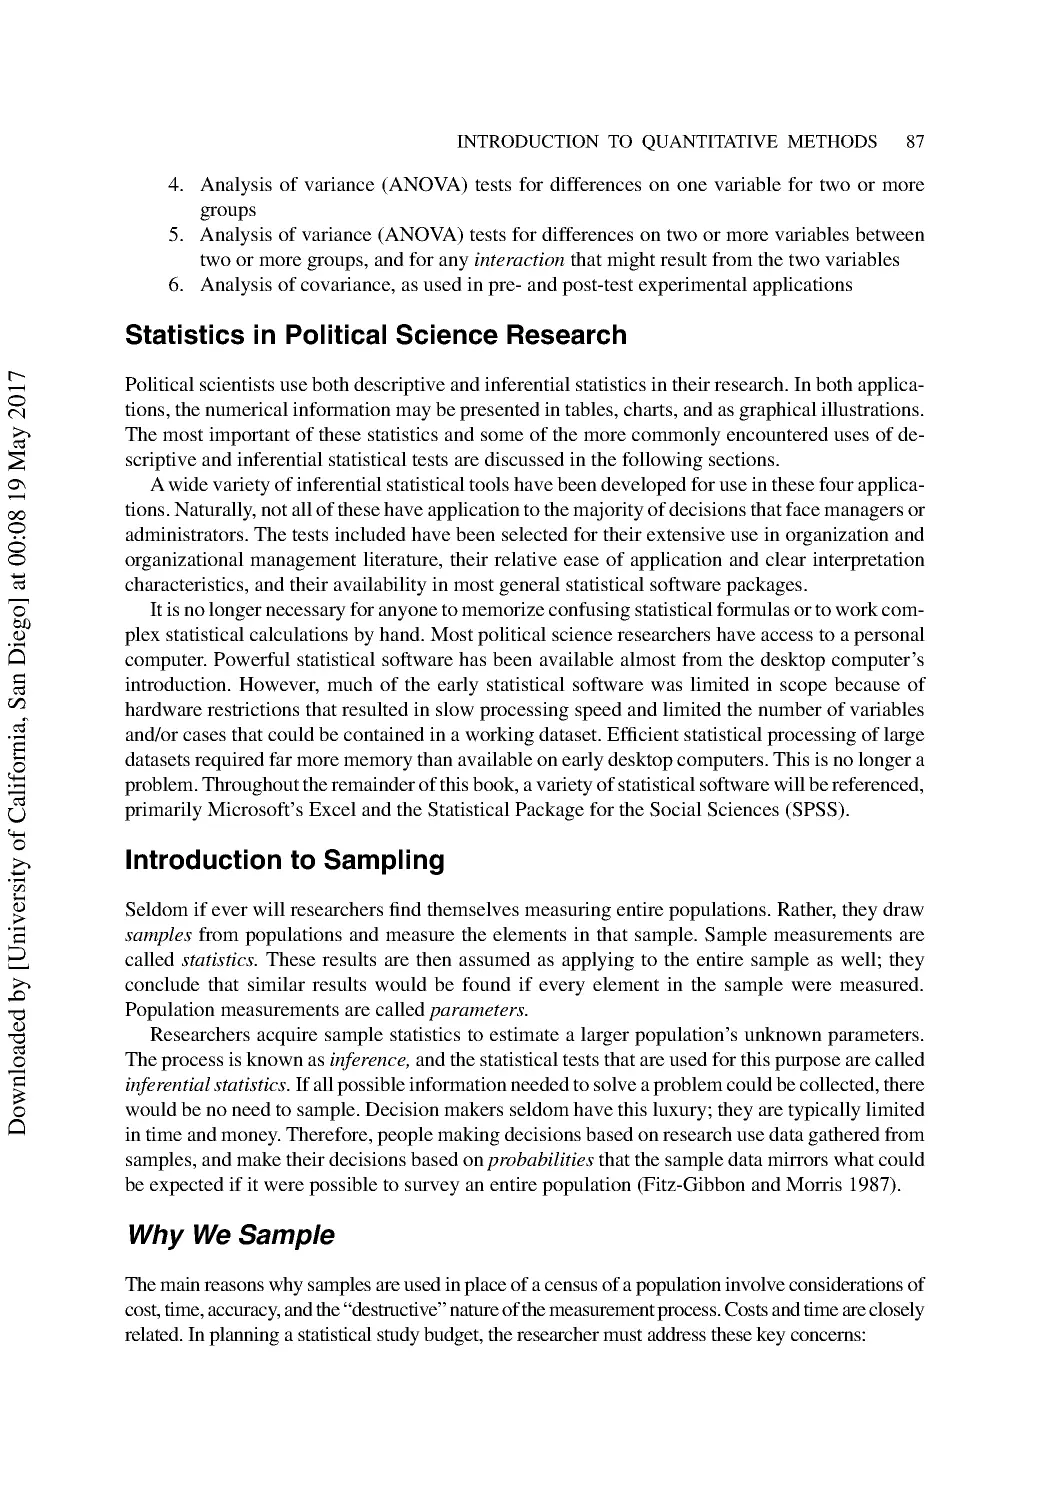 Statistics in Political Science Research
Introduction to Sampling